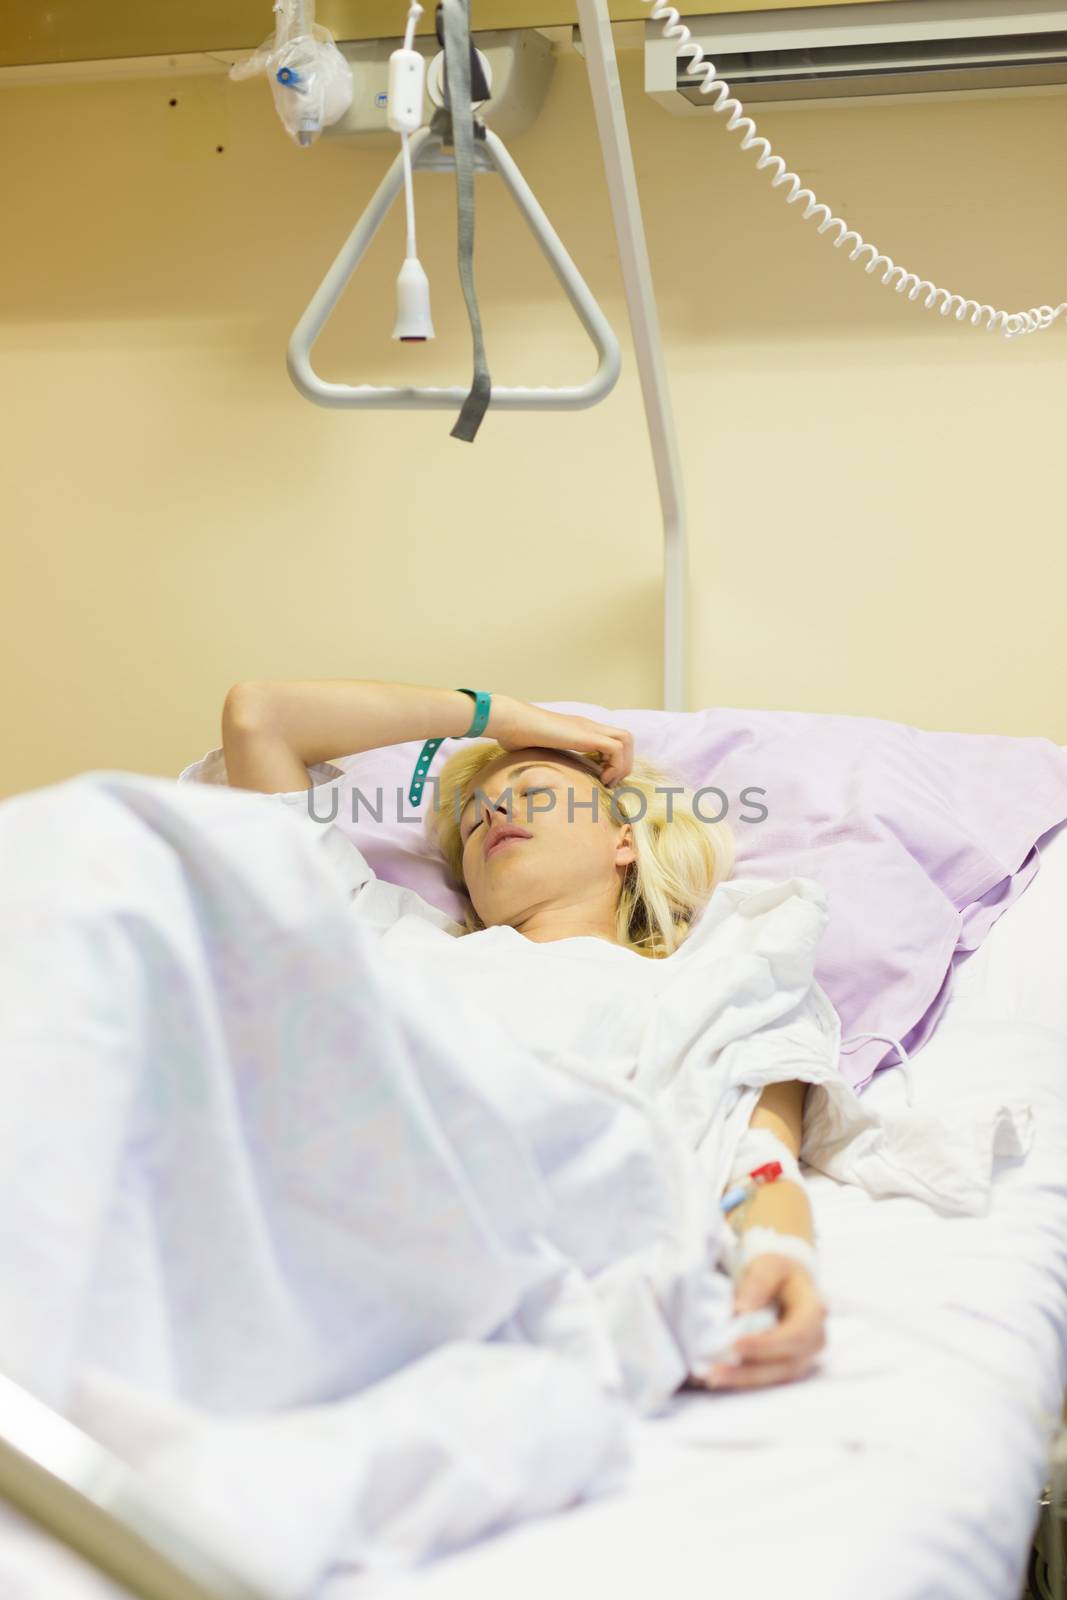 Bedridden female patient lying in hospital bed, recovering after surgery.